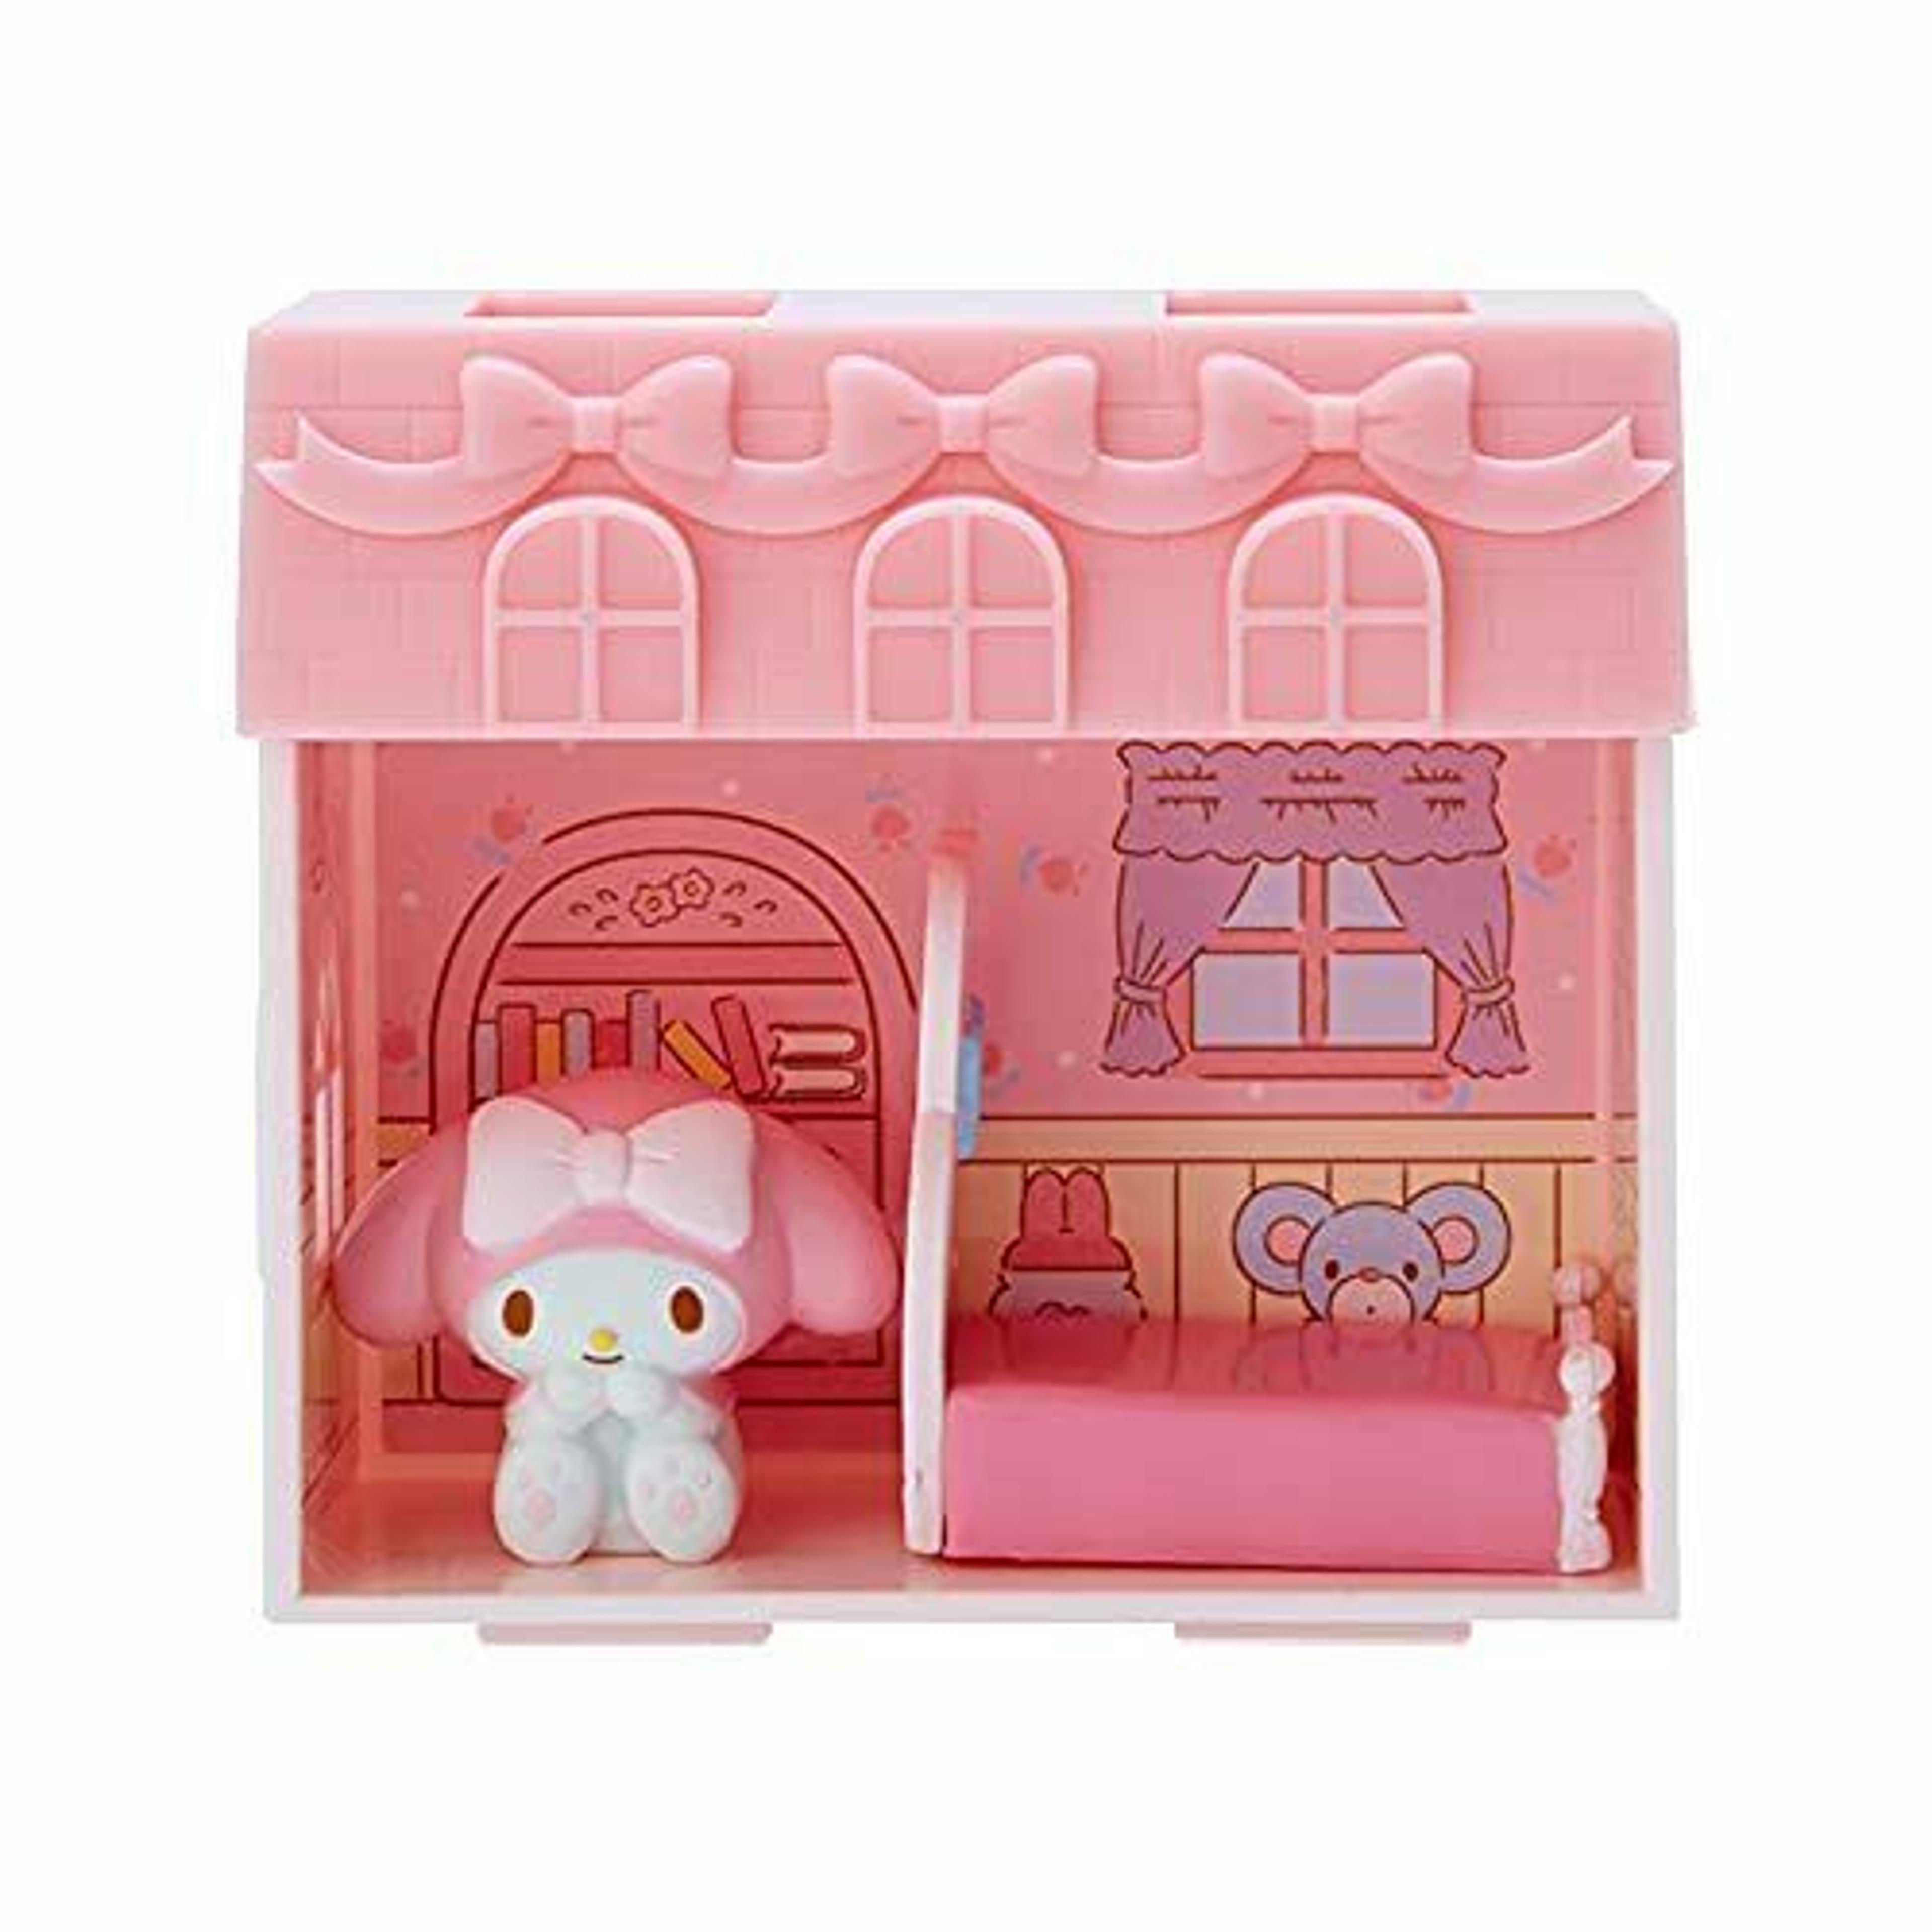 Alternate View 2 of Sanrio Characters Miniature House